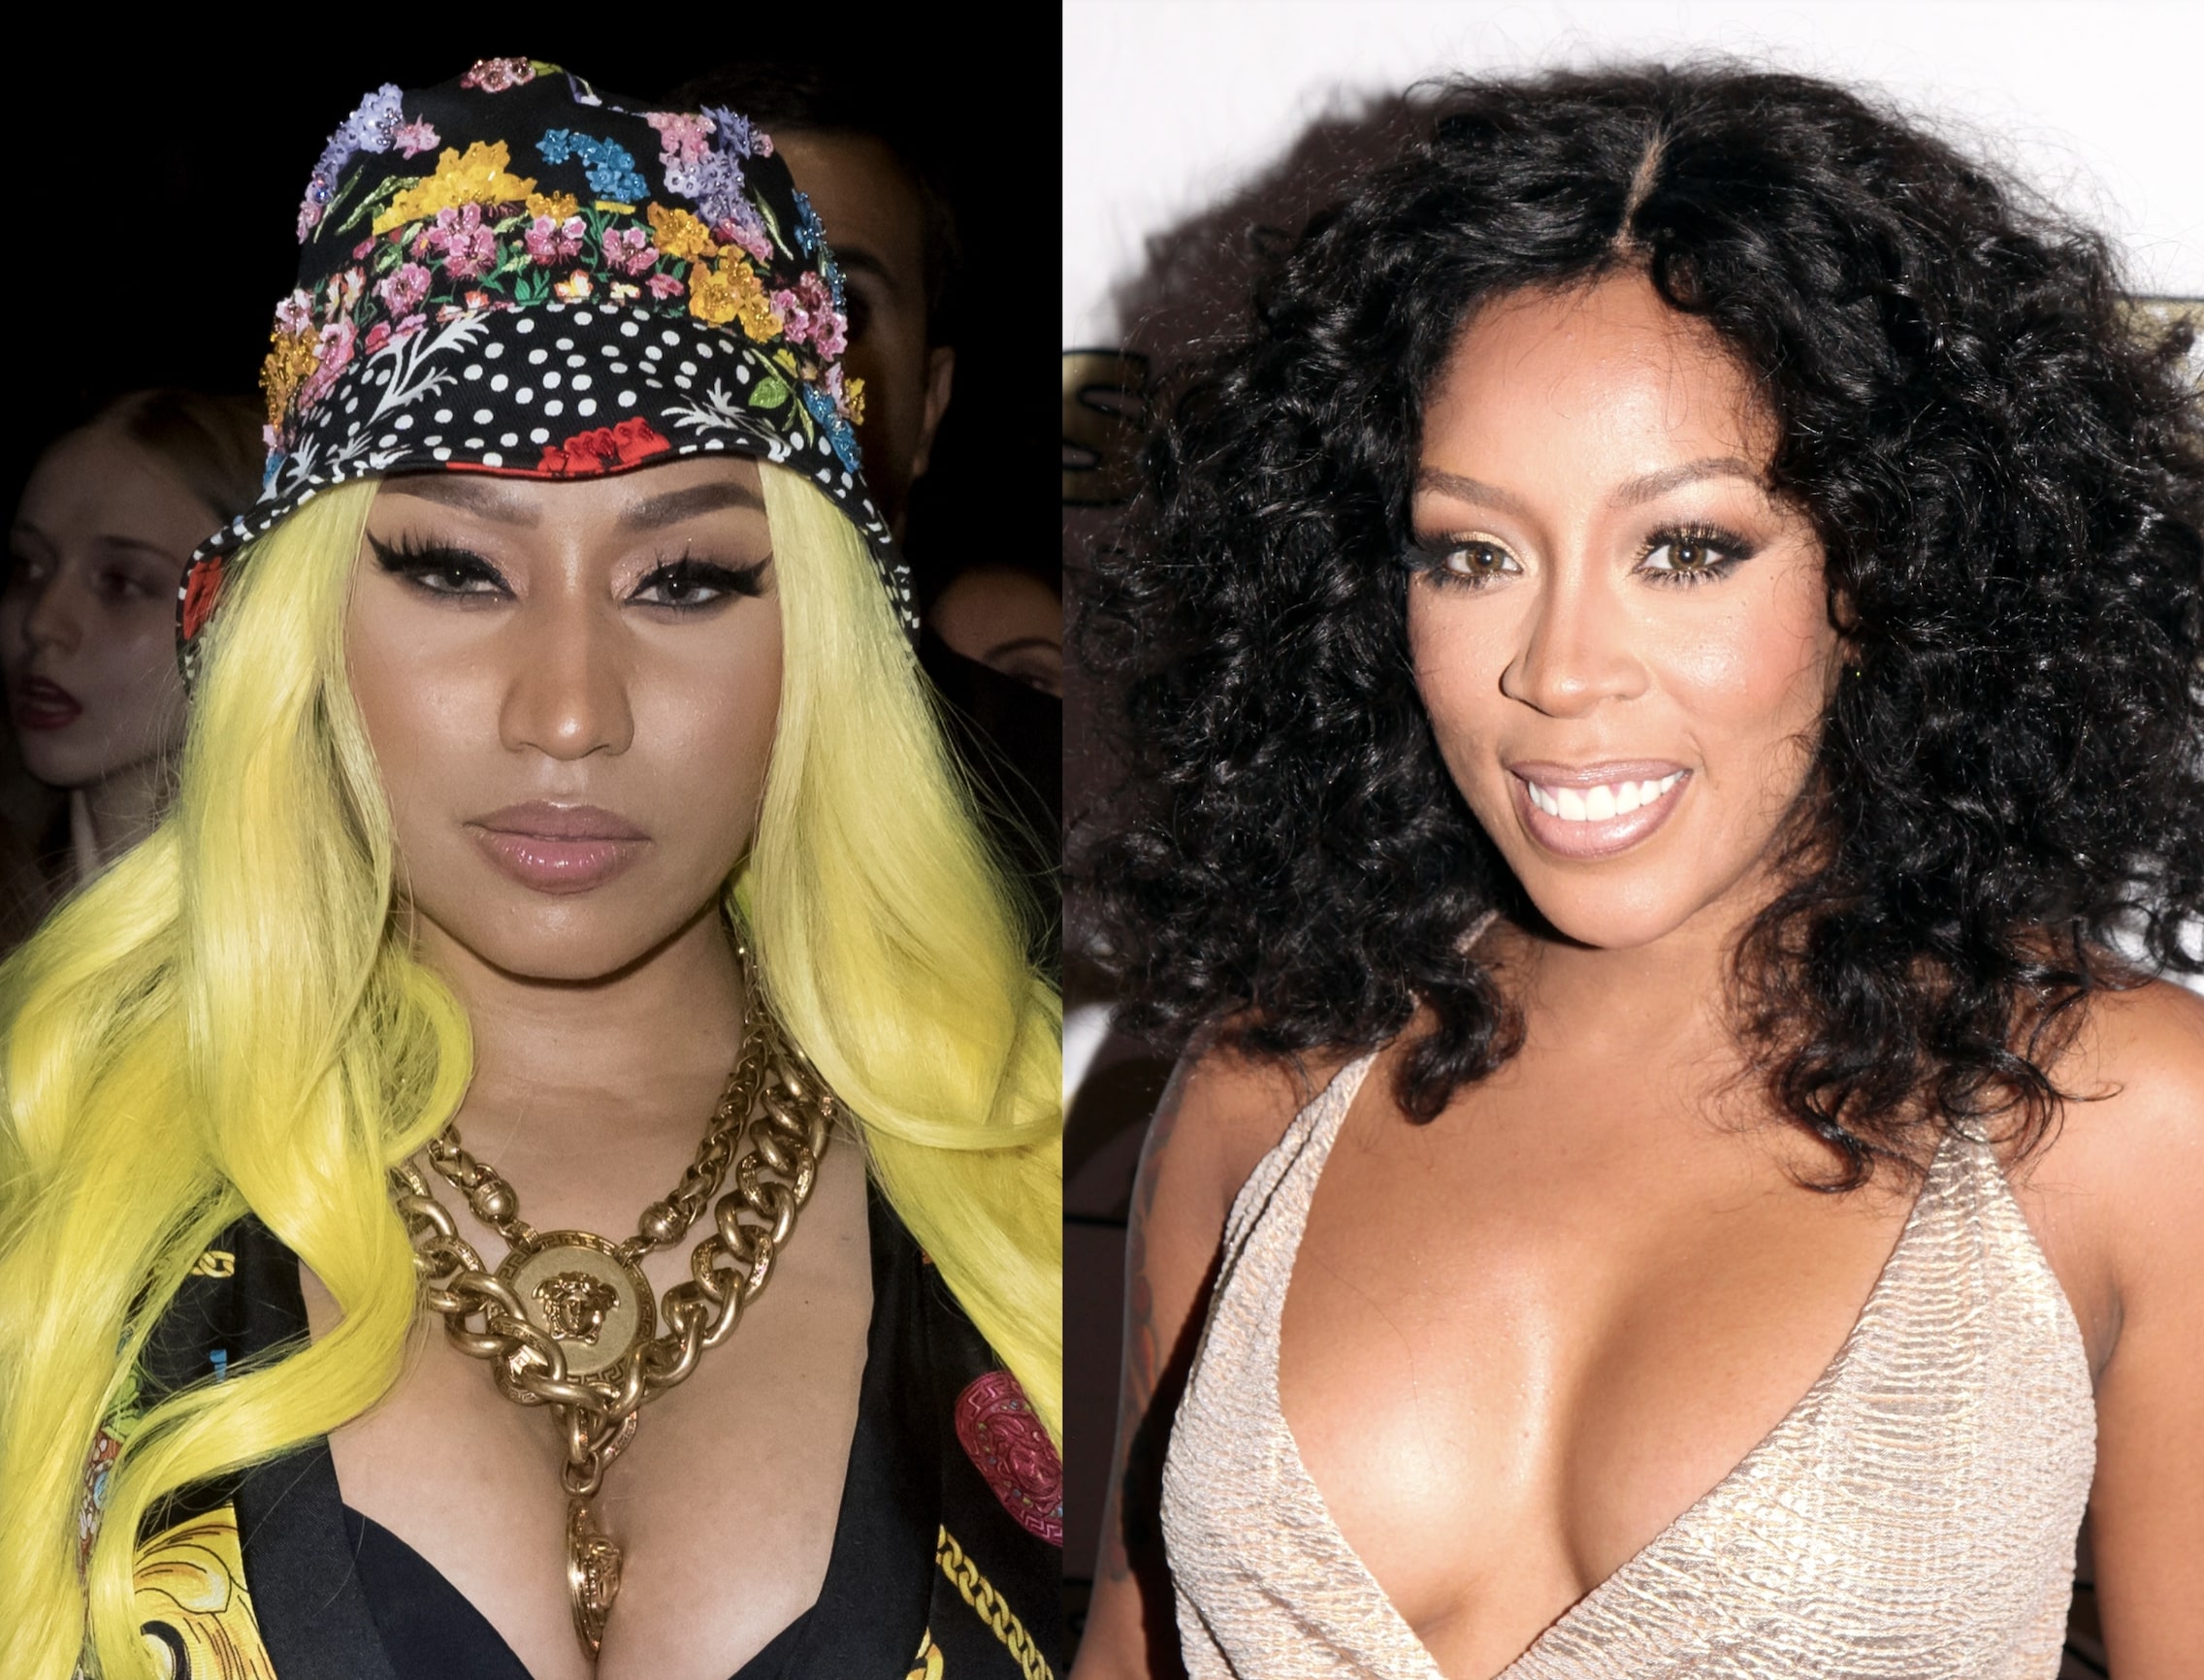 Nicki Minaj Stole “Buy A Heart” & Meek Mill’s Chain From K. Michelle, “L&HH” Star Alleges